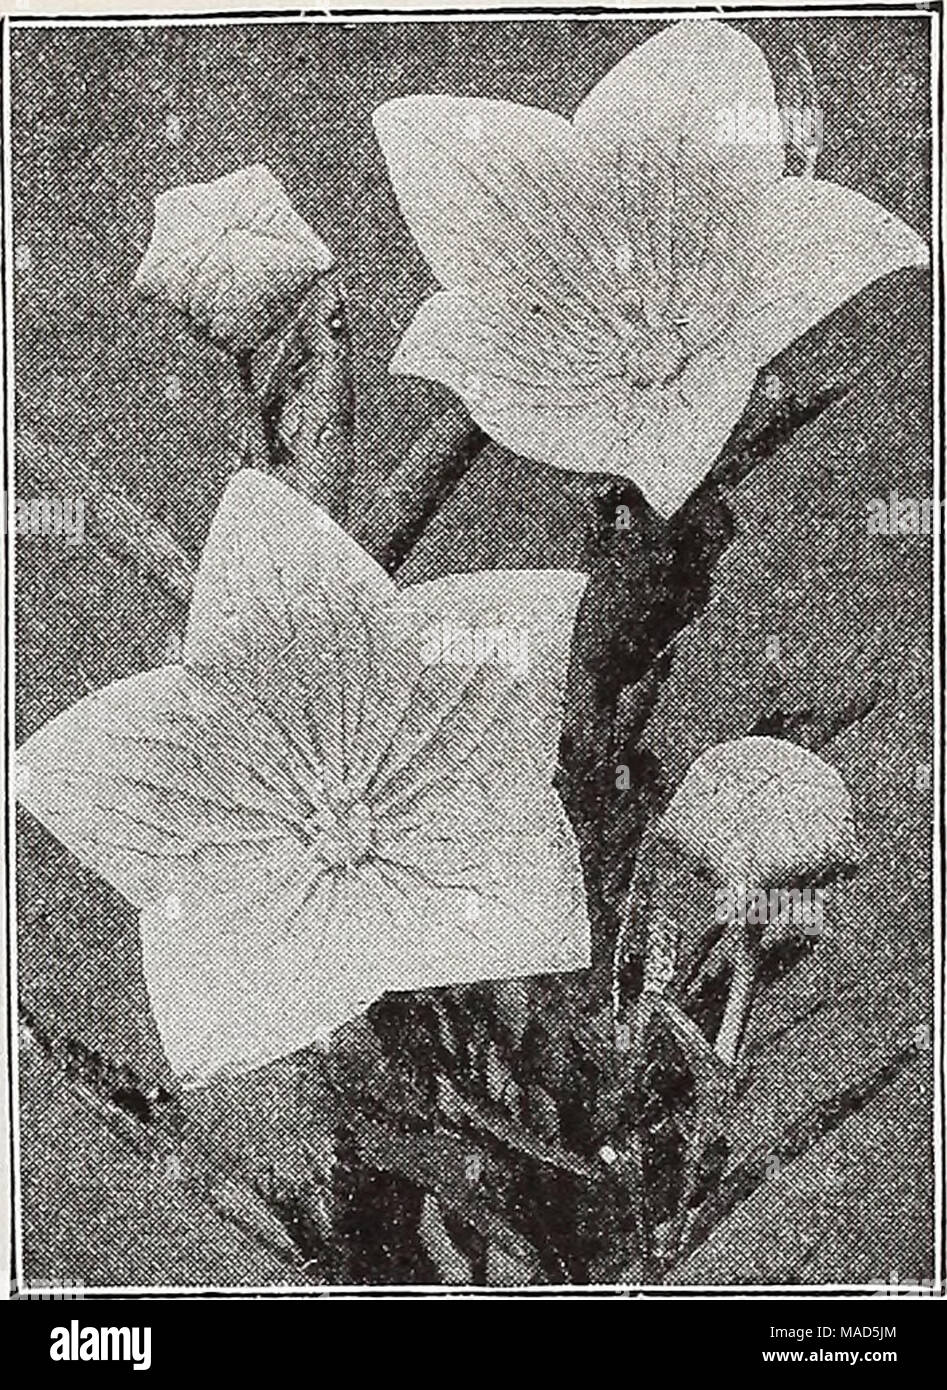 . Dreer's wholesale catalog for florists : autumn 1938 edition . Platycodon grandiflorum Platycodon—Japanese Bellflower Per doz. Per 100 Grandiflorum, Blue. Two-year-old roots $1 50 $10 00 — vriiite. Two-vear-old roots 1 50 10 00 Plumbago—Leadwort Ijarpent^e. Strong plants. Primula—Primroses Cashjueriana Veris (English Cowslip) Vulgaris (English Primrose). 2 00 12 00 3 00 20 00 2 00 12 00 2 00 12 00 Pulmonaria—Lungwort Angustifolia azurea. Low-growing tufts of dark green foliage and deep sky blue flower spikes in early spring. $3.50 per doz.; $25.00 per 100. /Tv^l! ^.'^x^ n Stock Photo